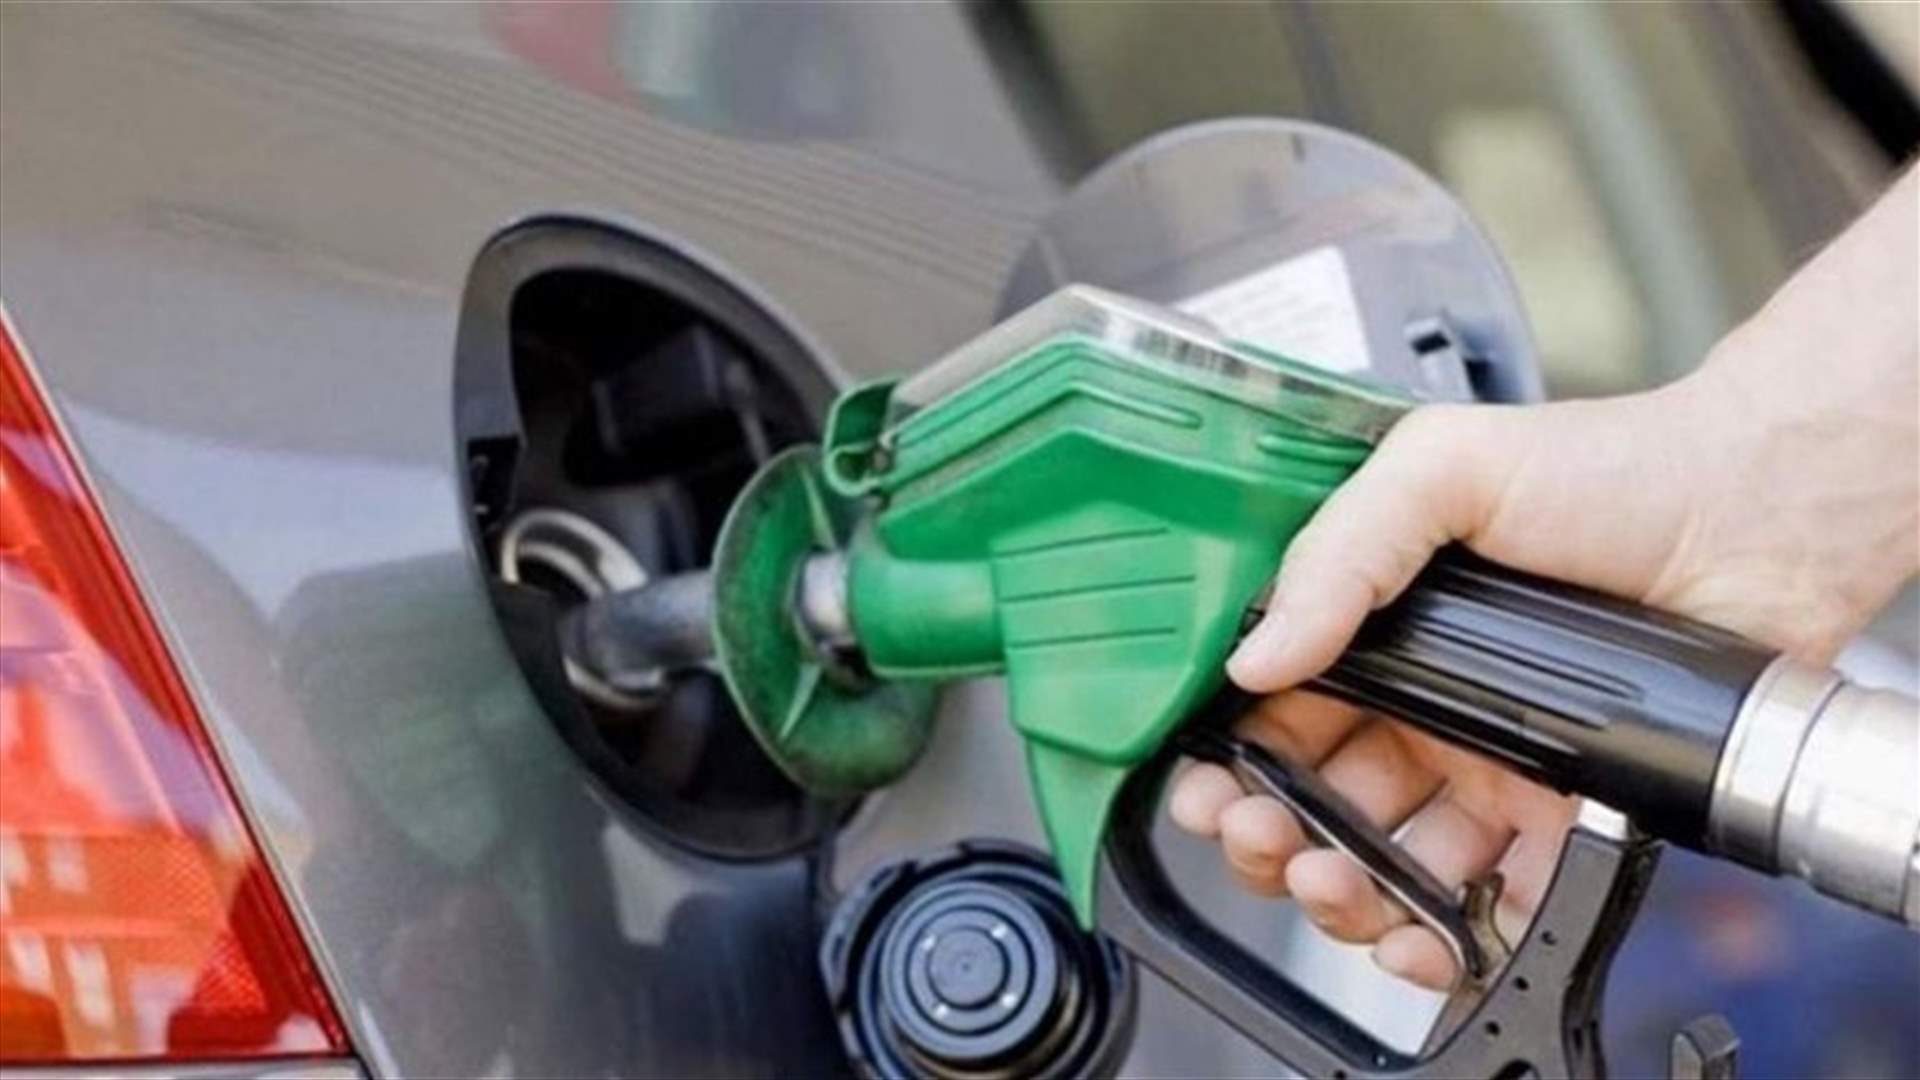 Fuel prices across Lebanon on the rise again